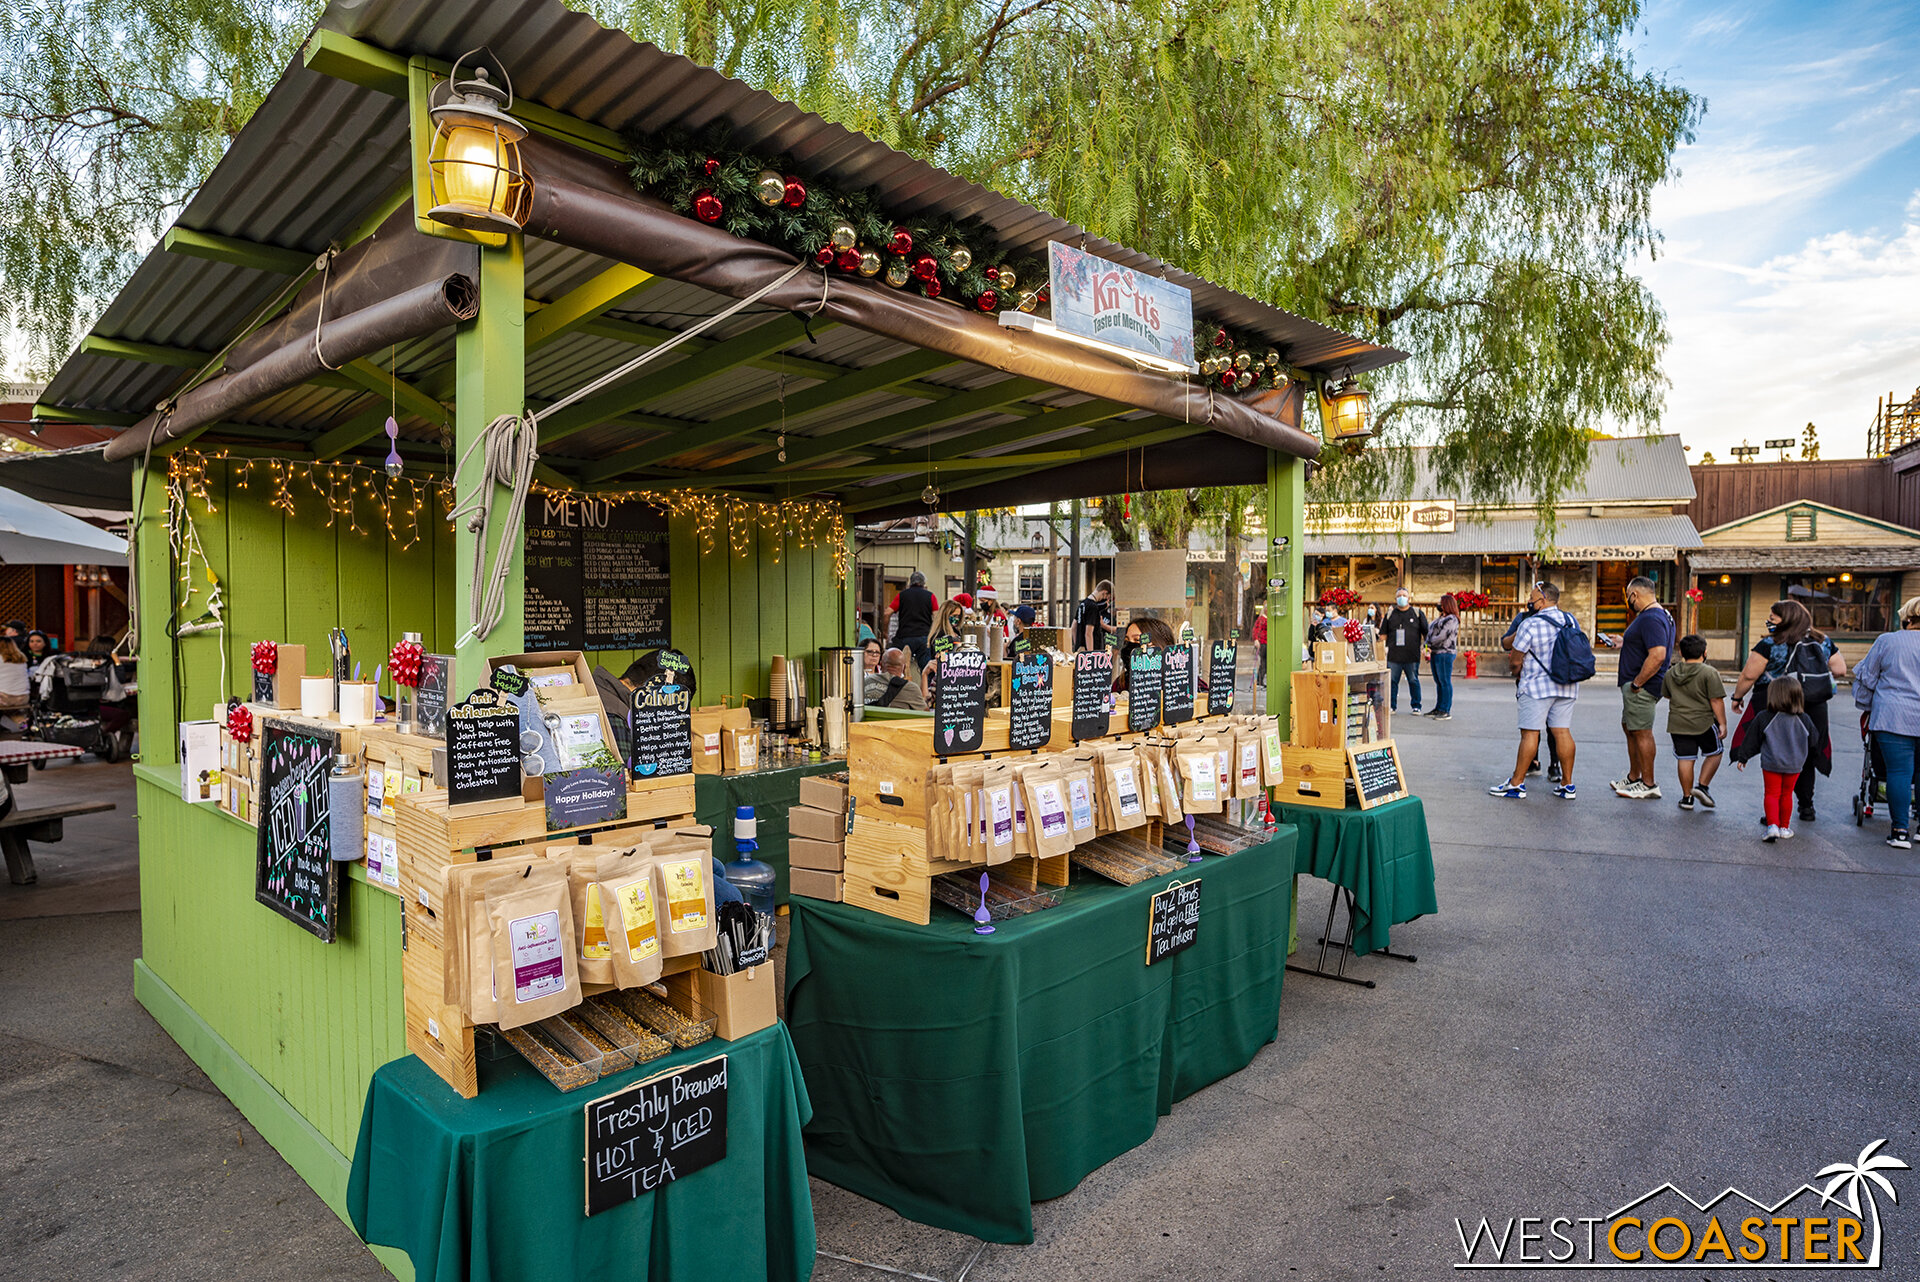  The Christmas Crafts Fair returns to Ghost Town, with plenty of souvenir stalls for guests looking to do some early holiday shopping. 